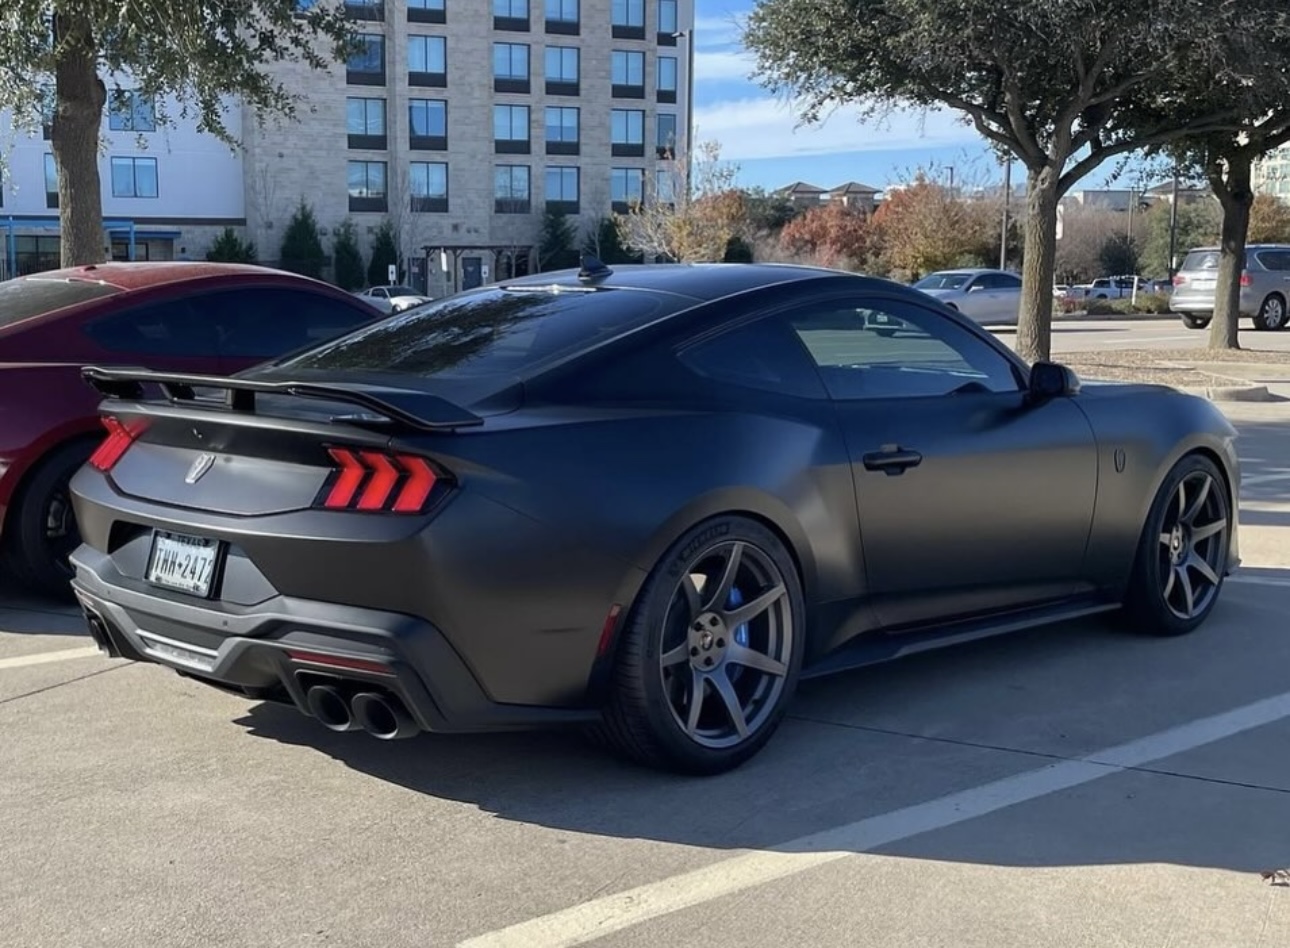 S650 Mustang Official S650 Dark Horse Aftermarket Wheel/Tire Thread! IMG_3103